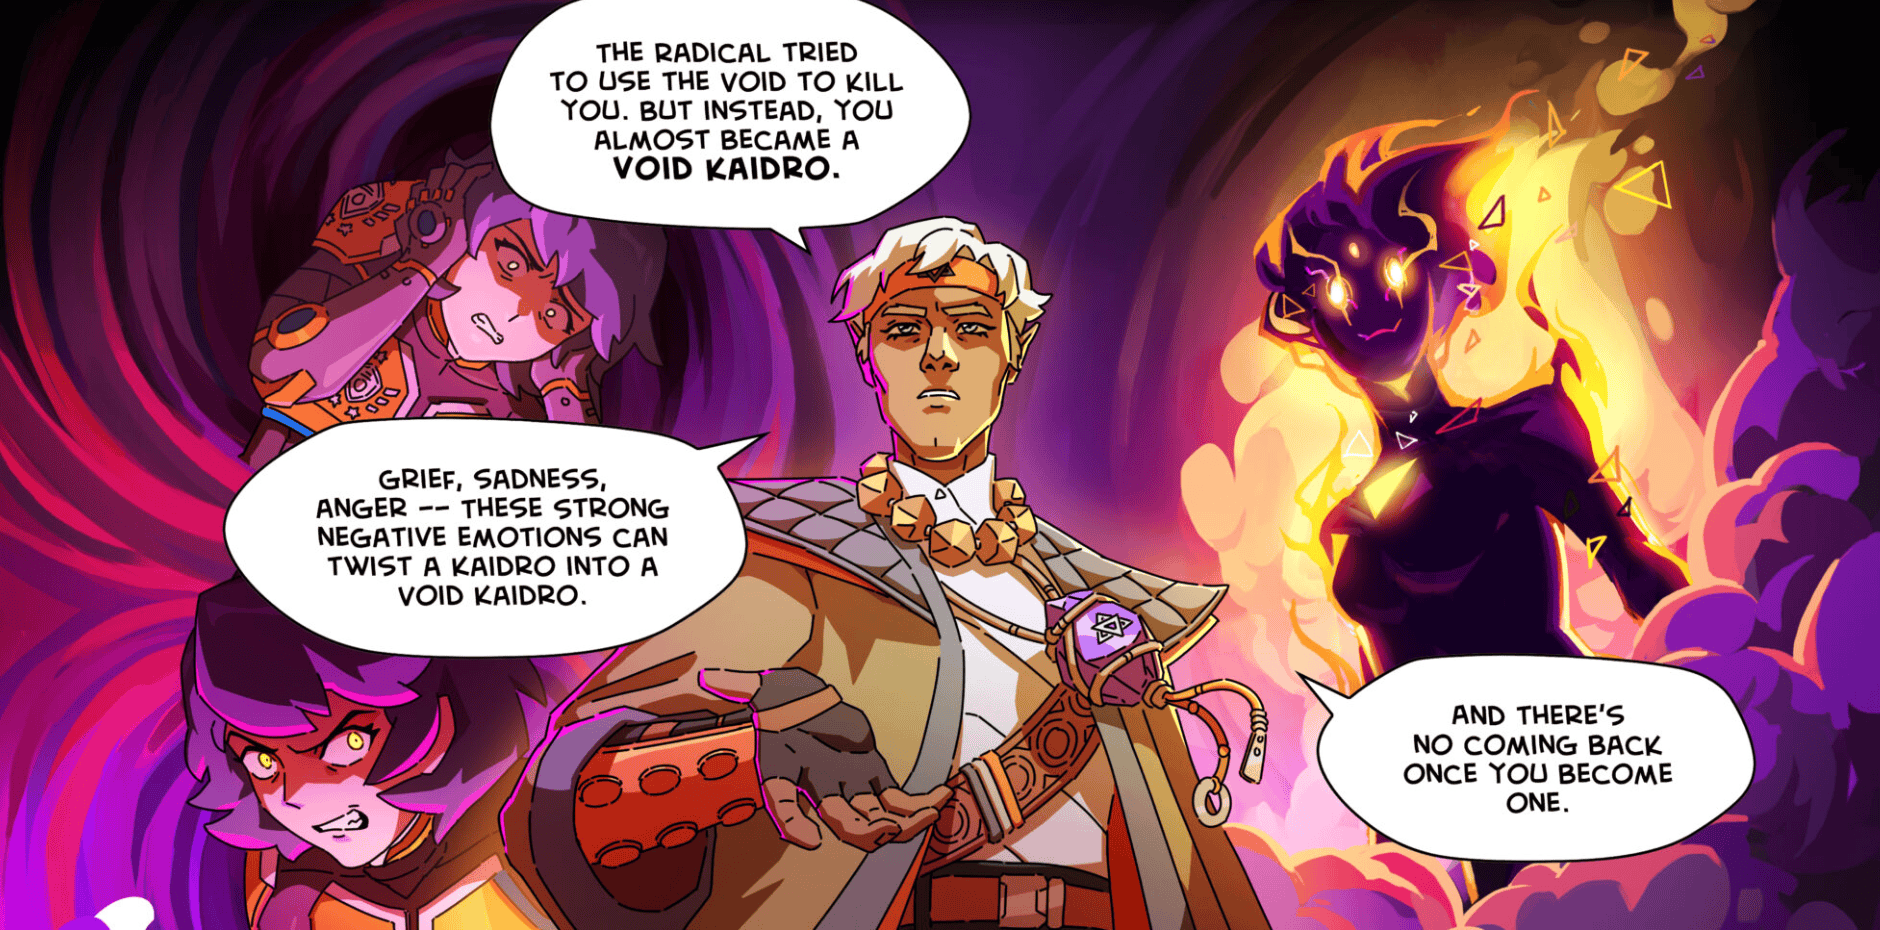 From Webcomics to Multiplayer RPG: The Rise of Kaidro